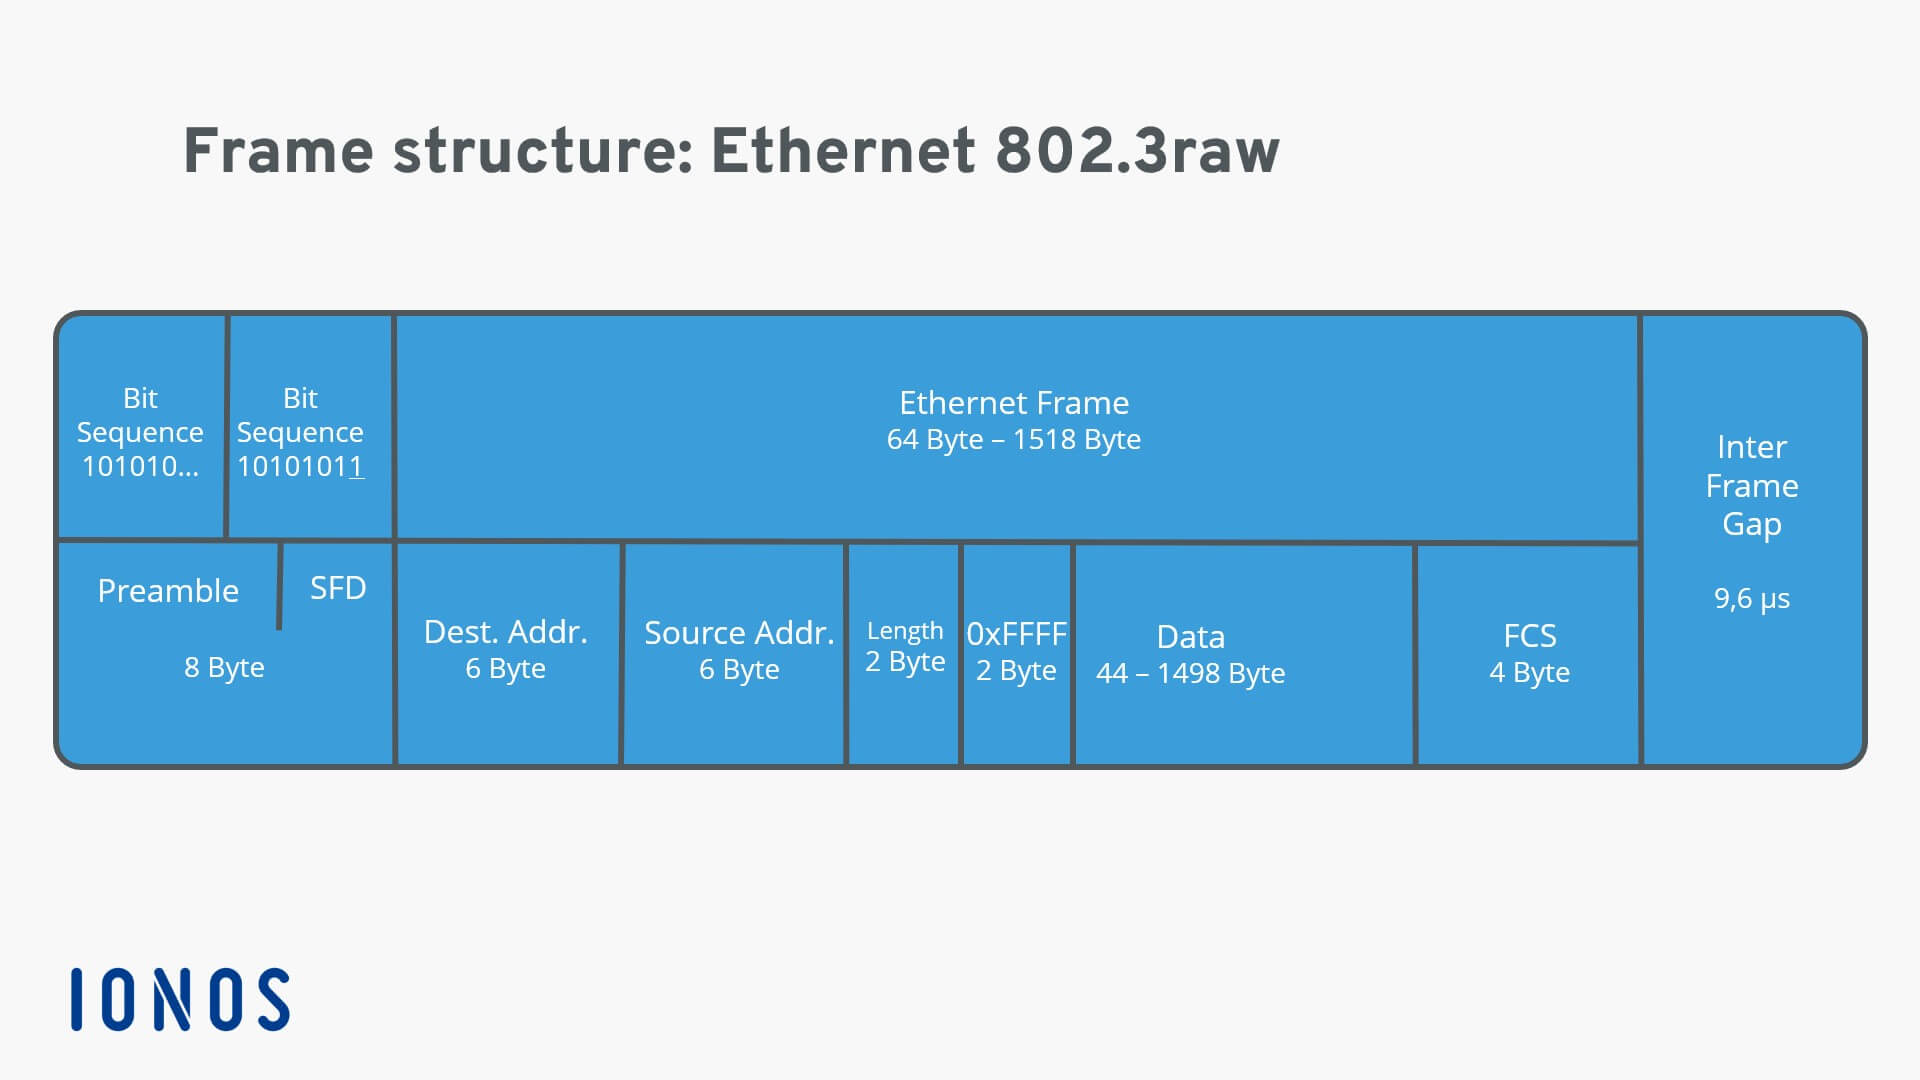 Representation of an Ethernet 802.3raw frame structure